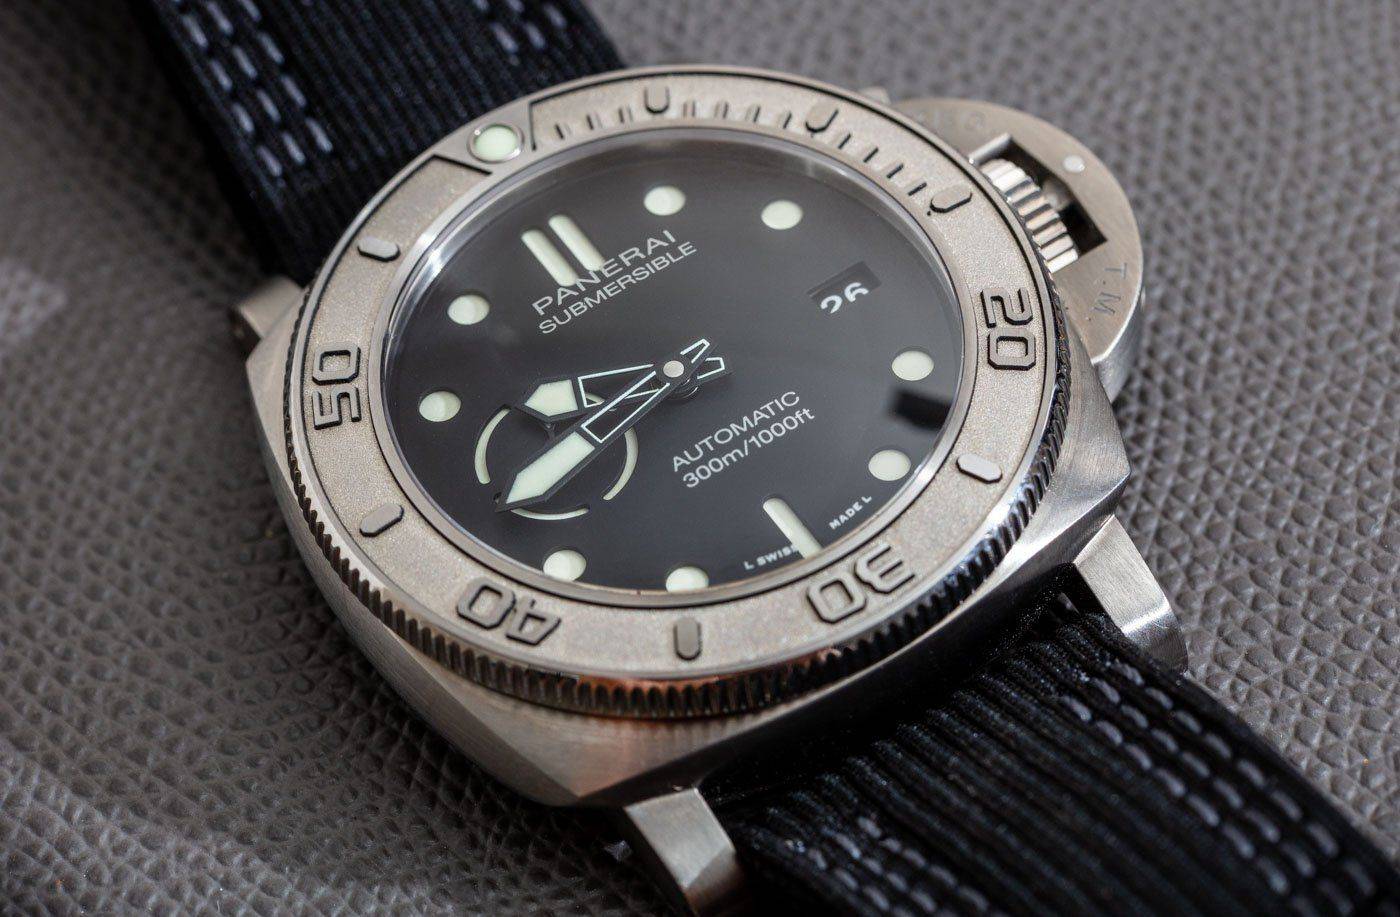 anerai-Submersible-Mike-Horn-Edition-PAM00984-01-1.jpg